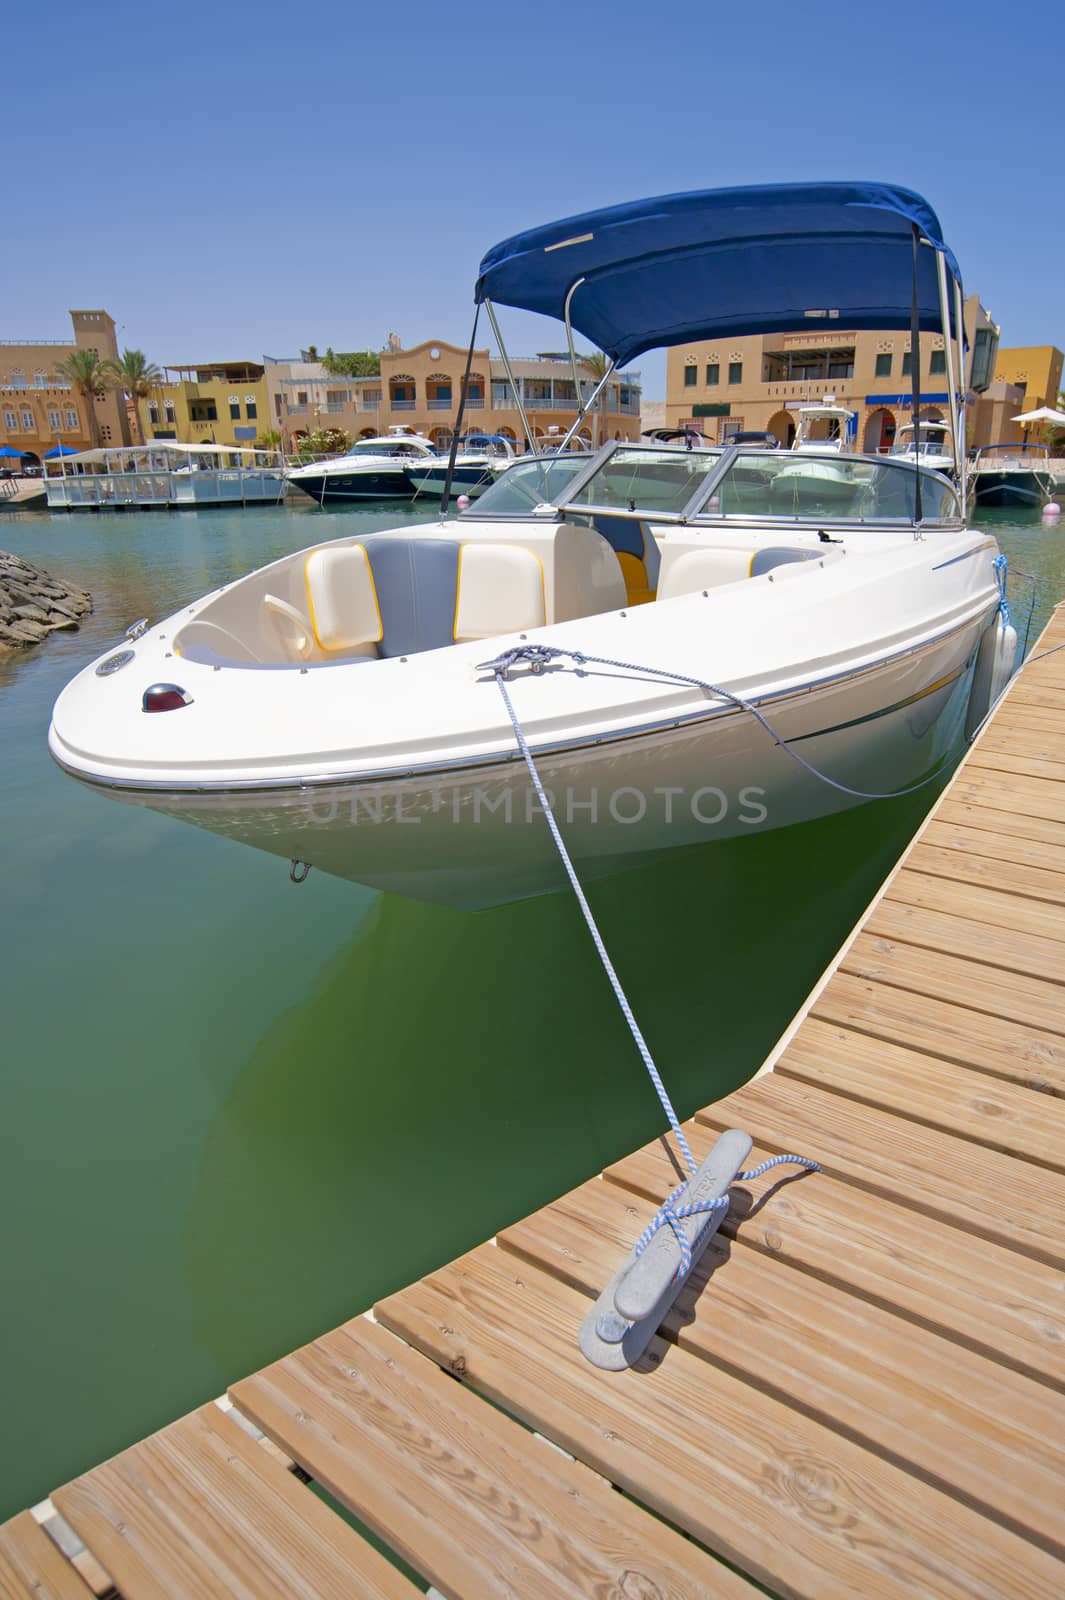 A luxury speedboat moored to a private jetty in a tropical marina